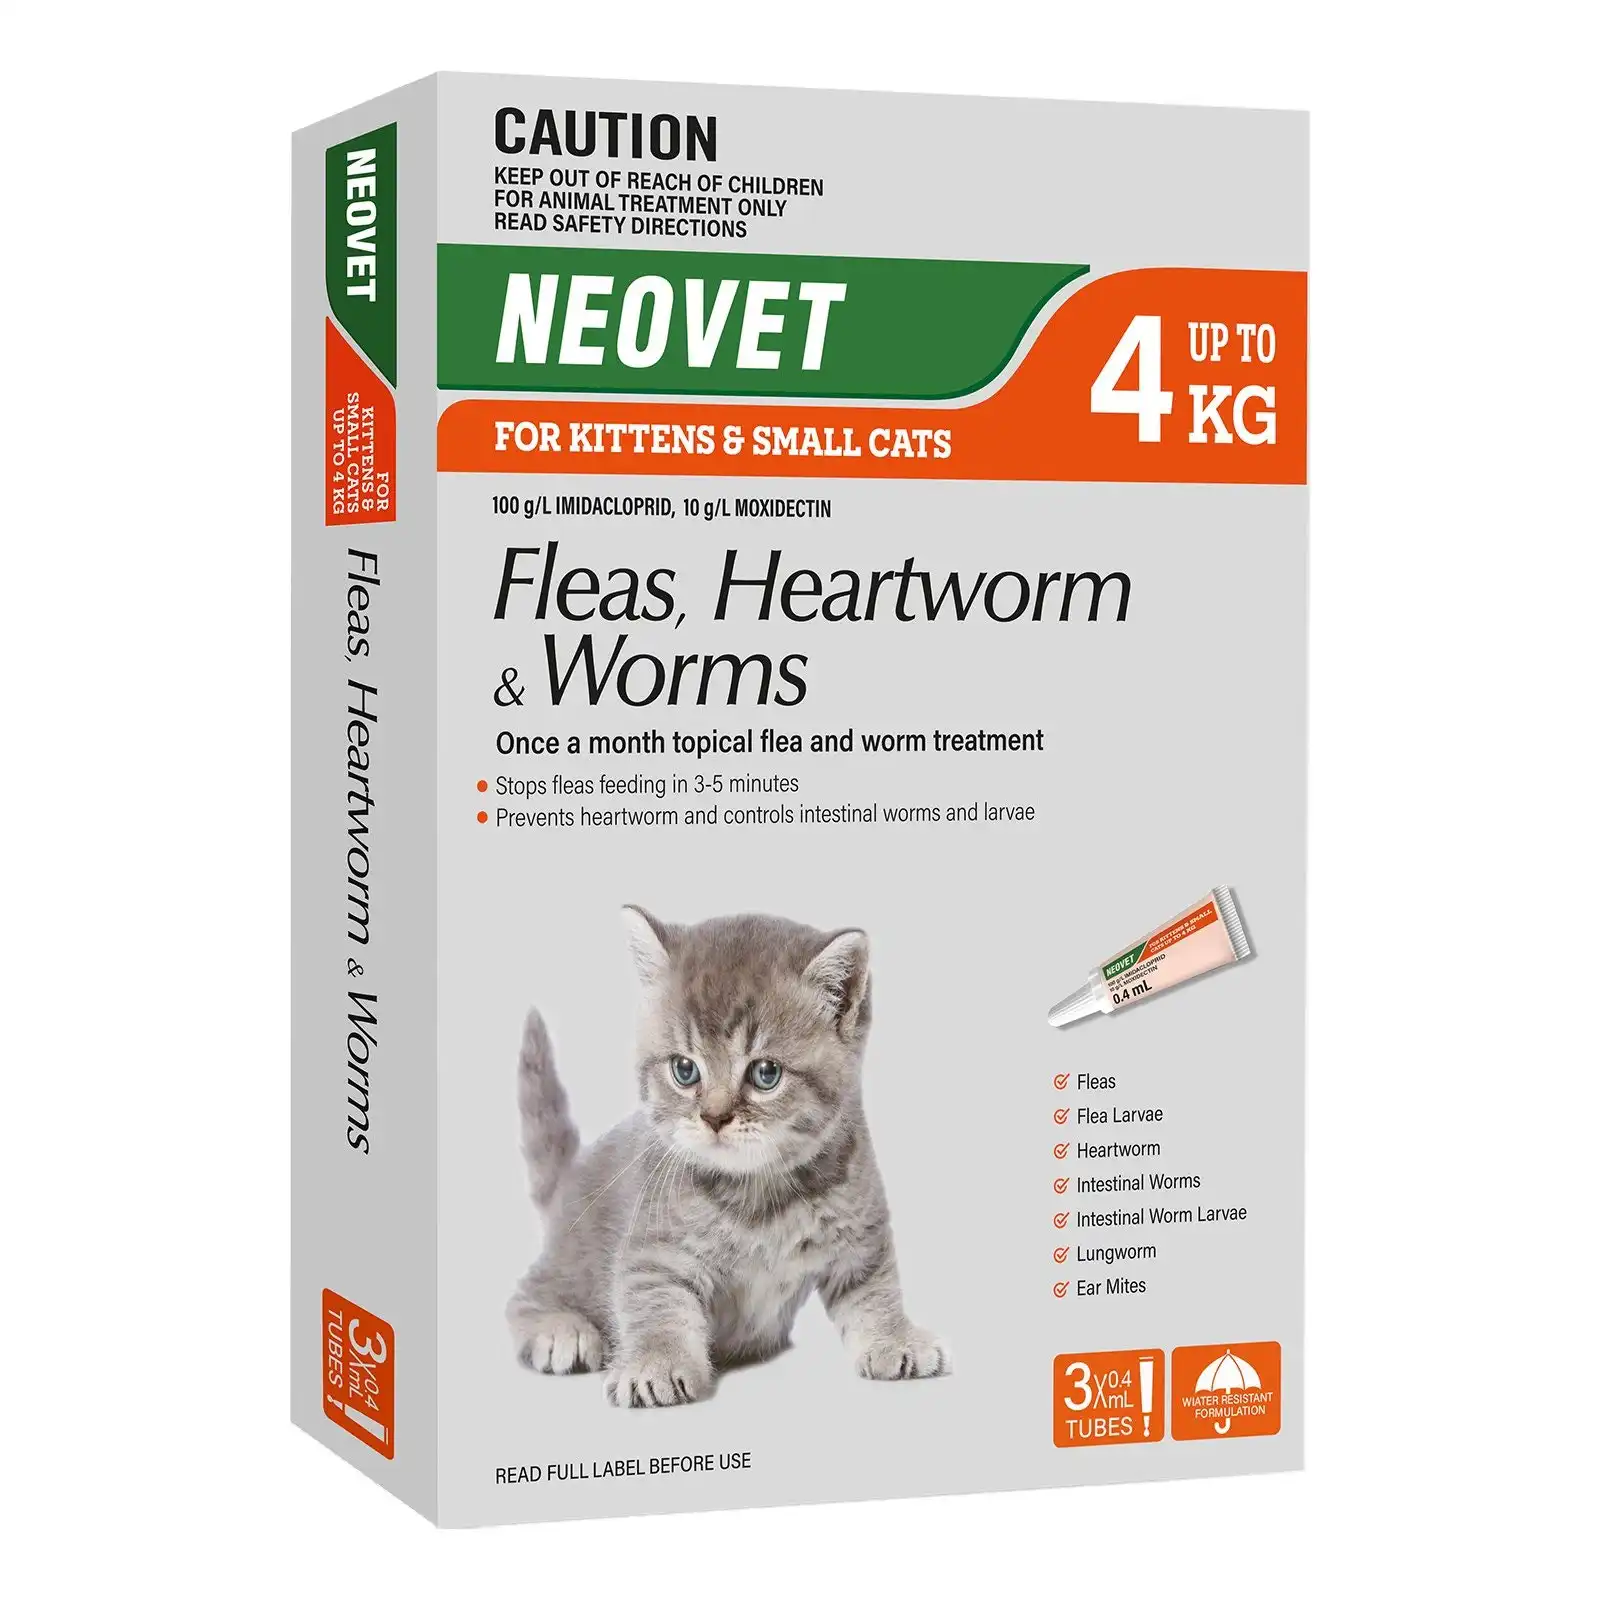 Neovet - Generic Advocate for Kittens and Small Cats Up To 4 Kg (ORANGE) 3 Pack